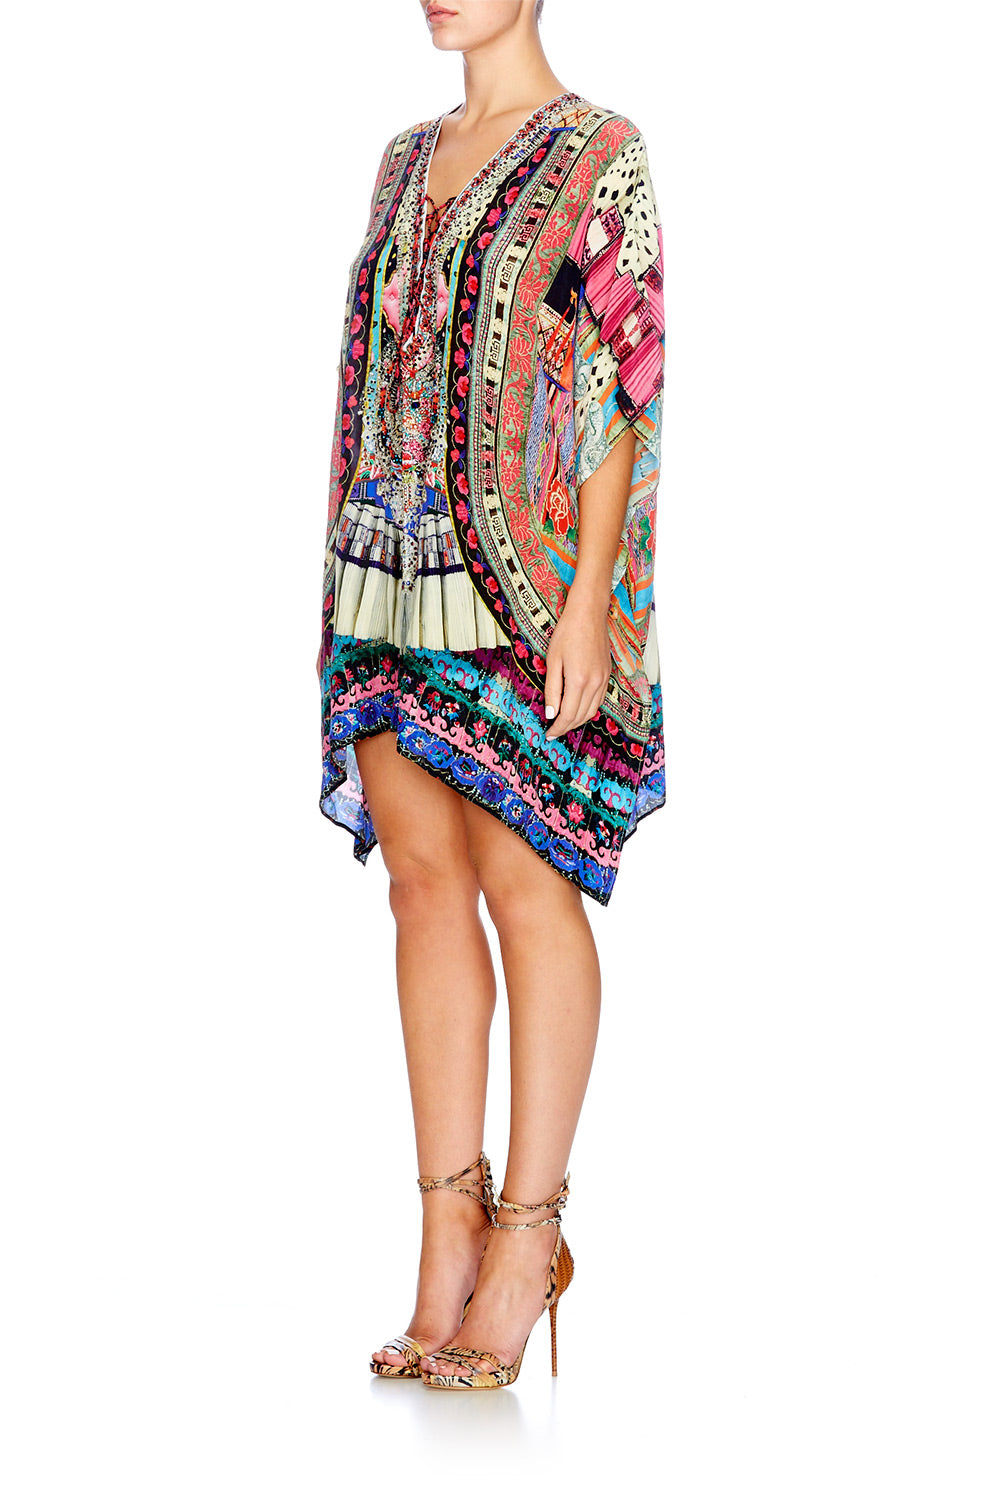 ABOUT A GIRL SHORT LACE UP KAFTAN